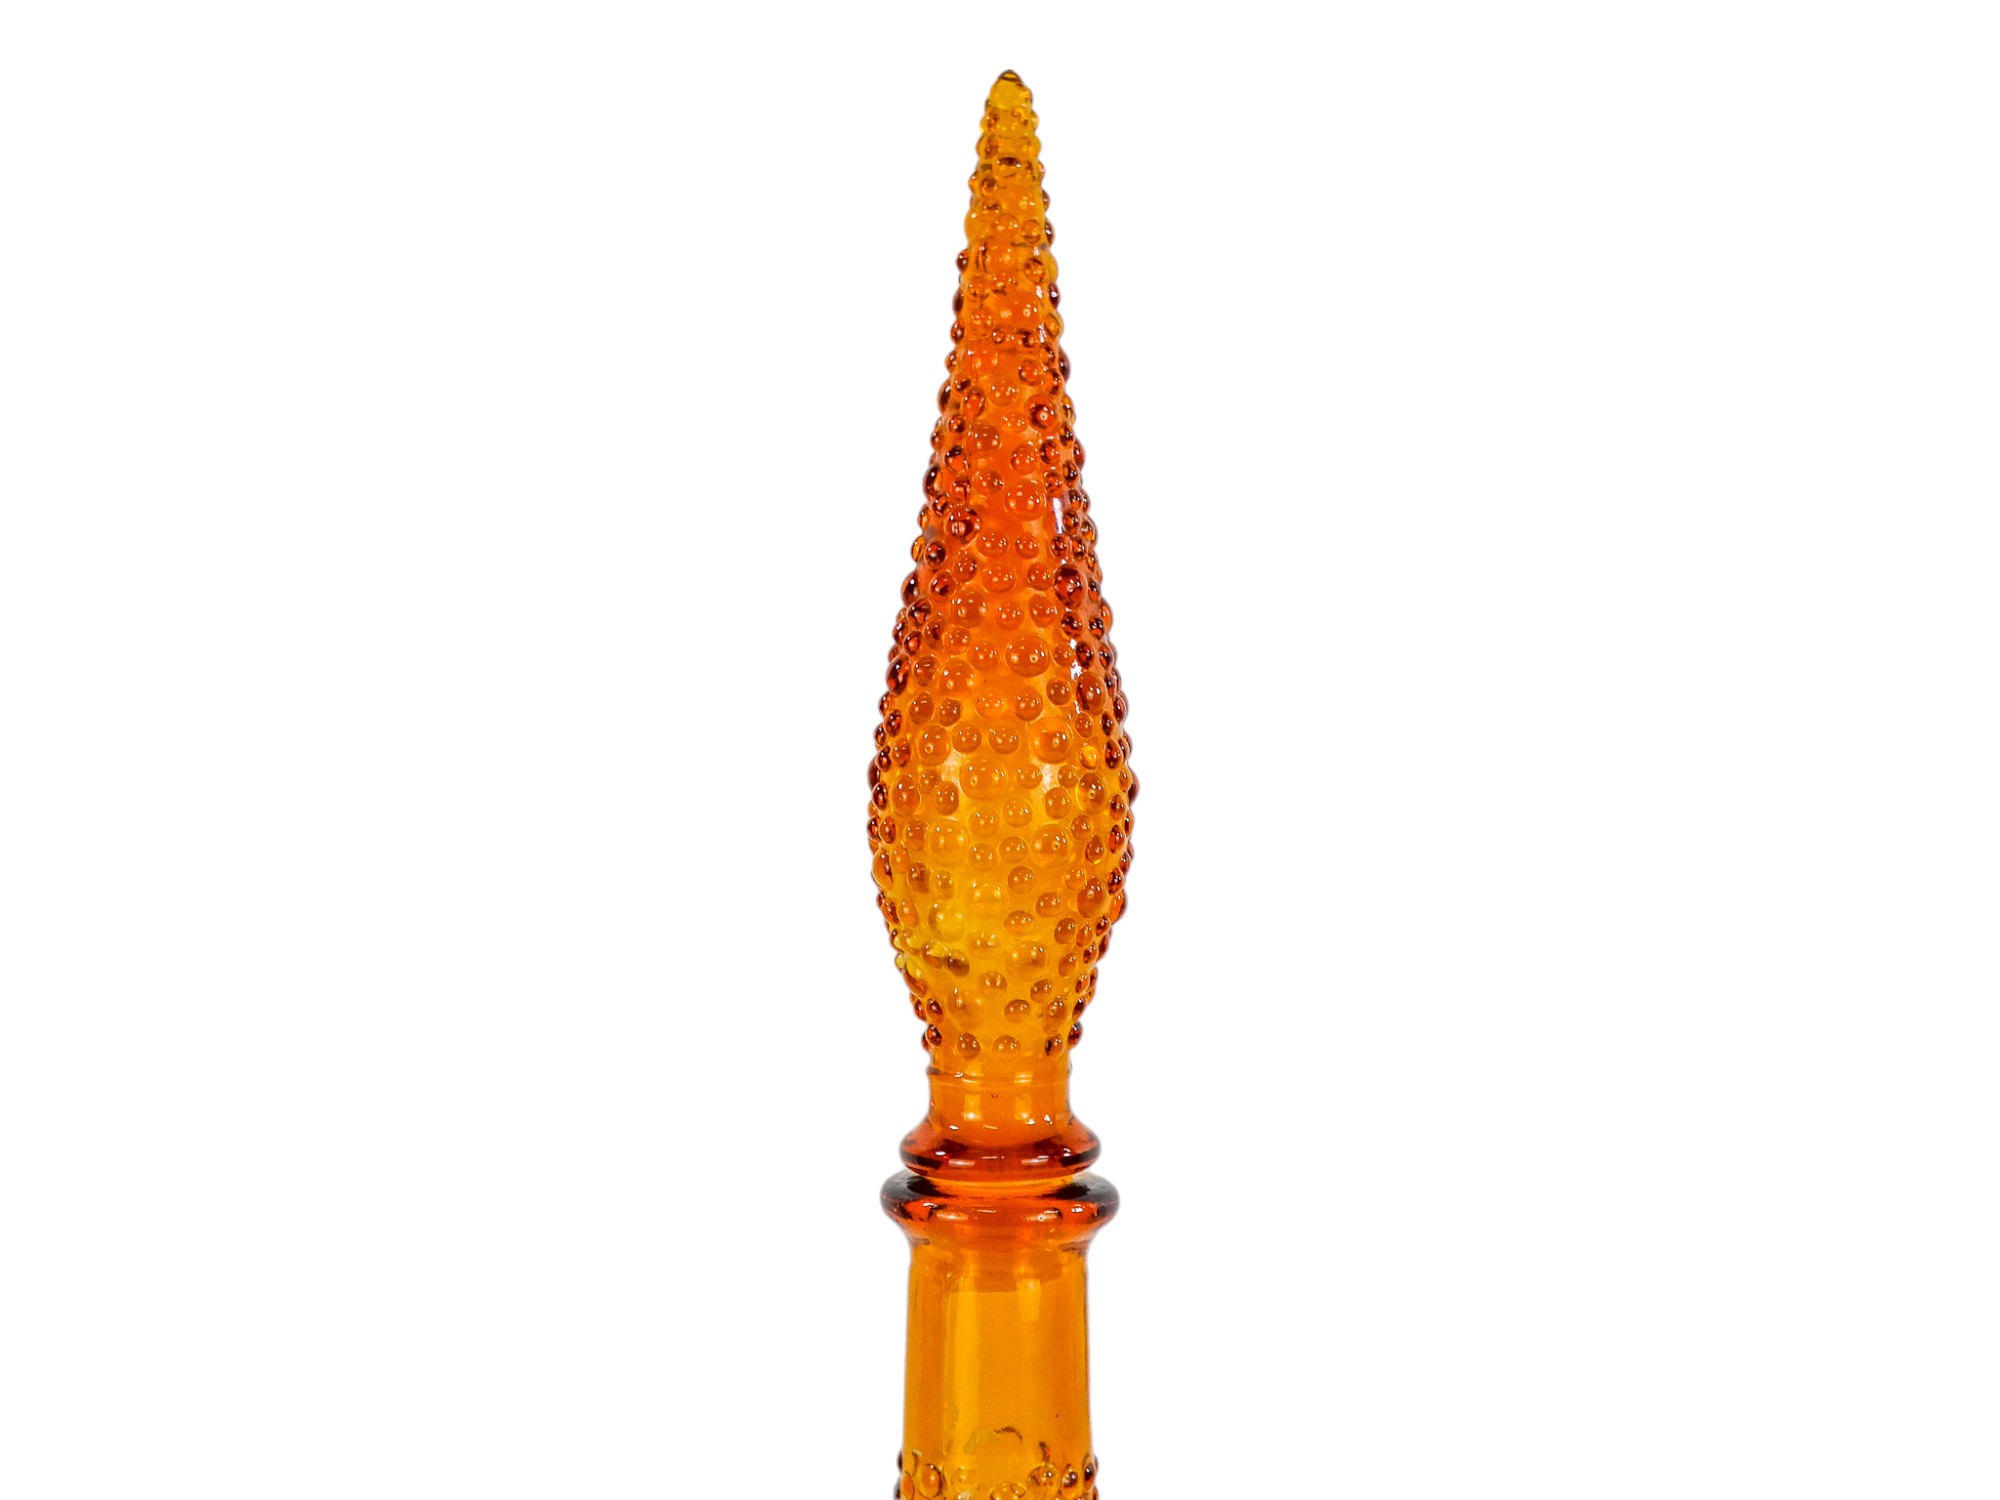 An Empoli genie bottle vase and stopper - amber with blister decoration, 57cm high - Image 3 of 6